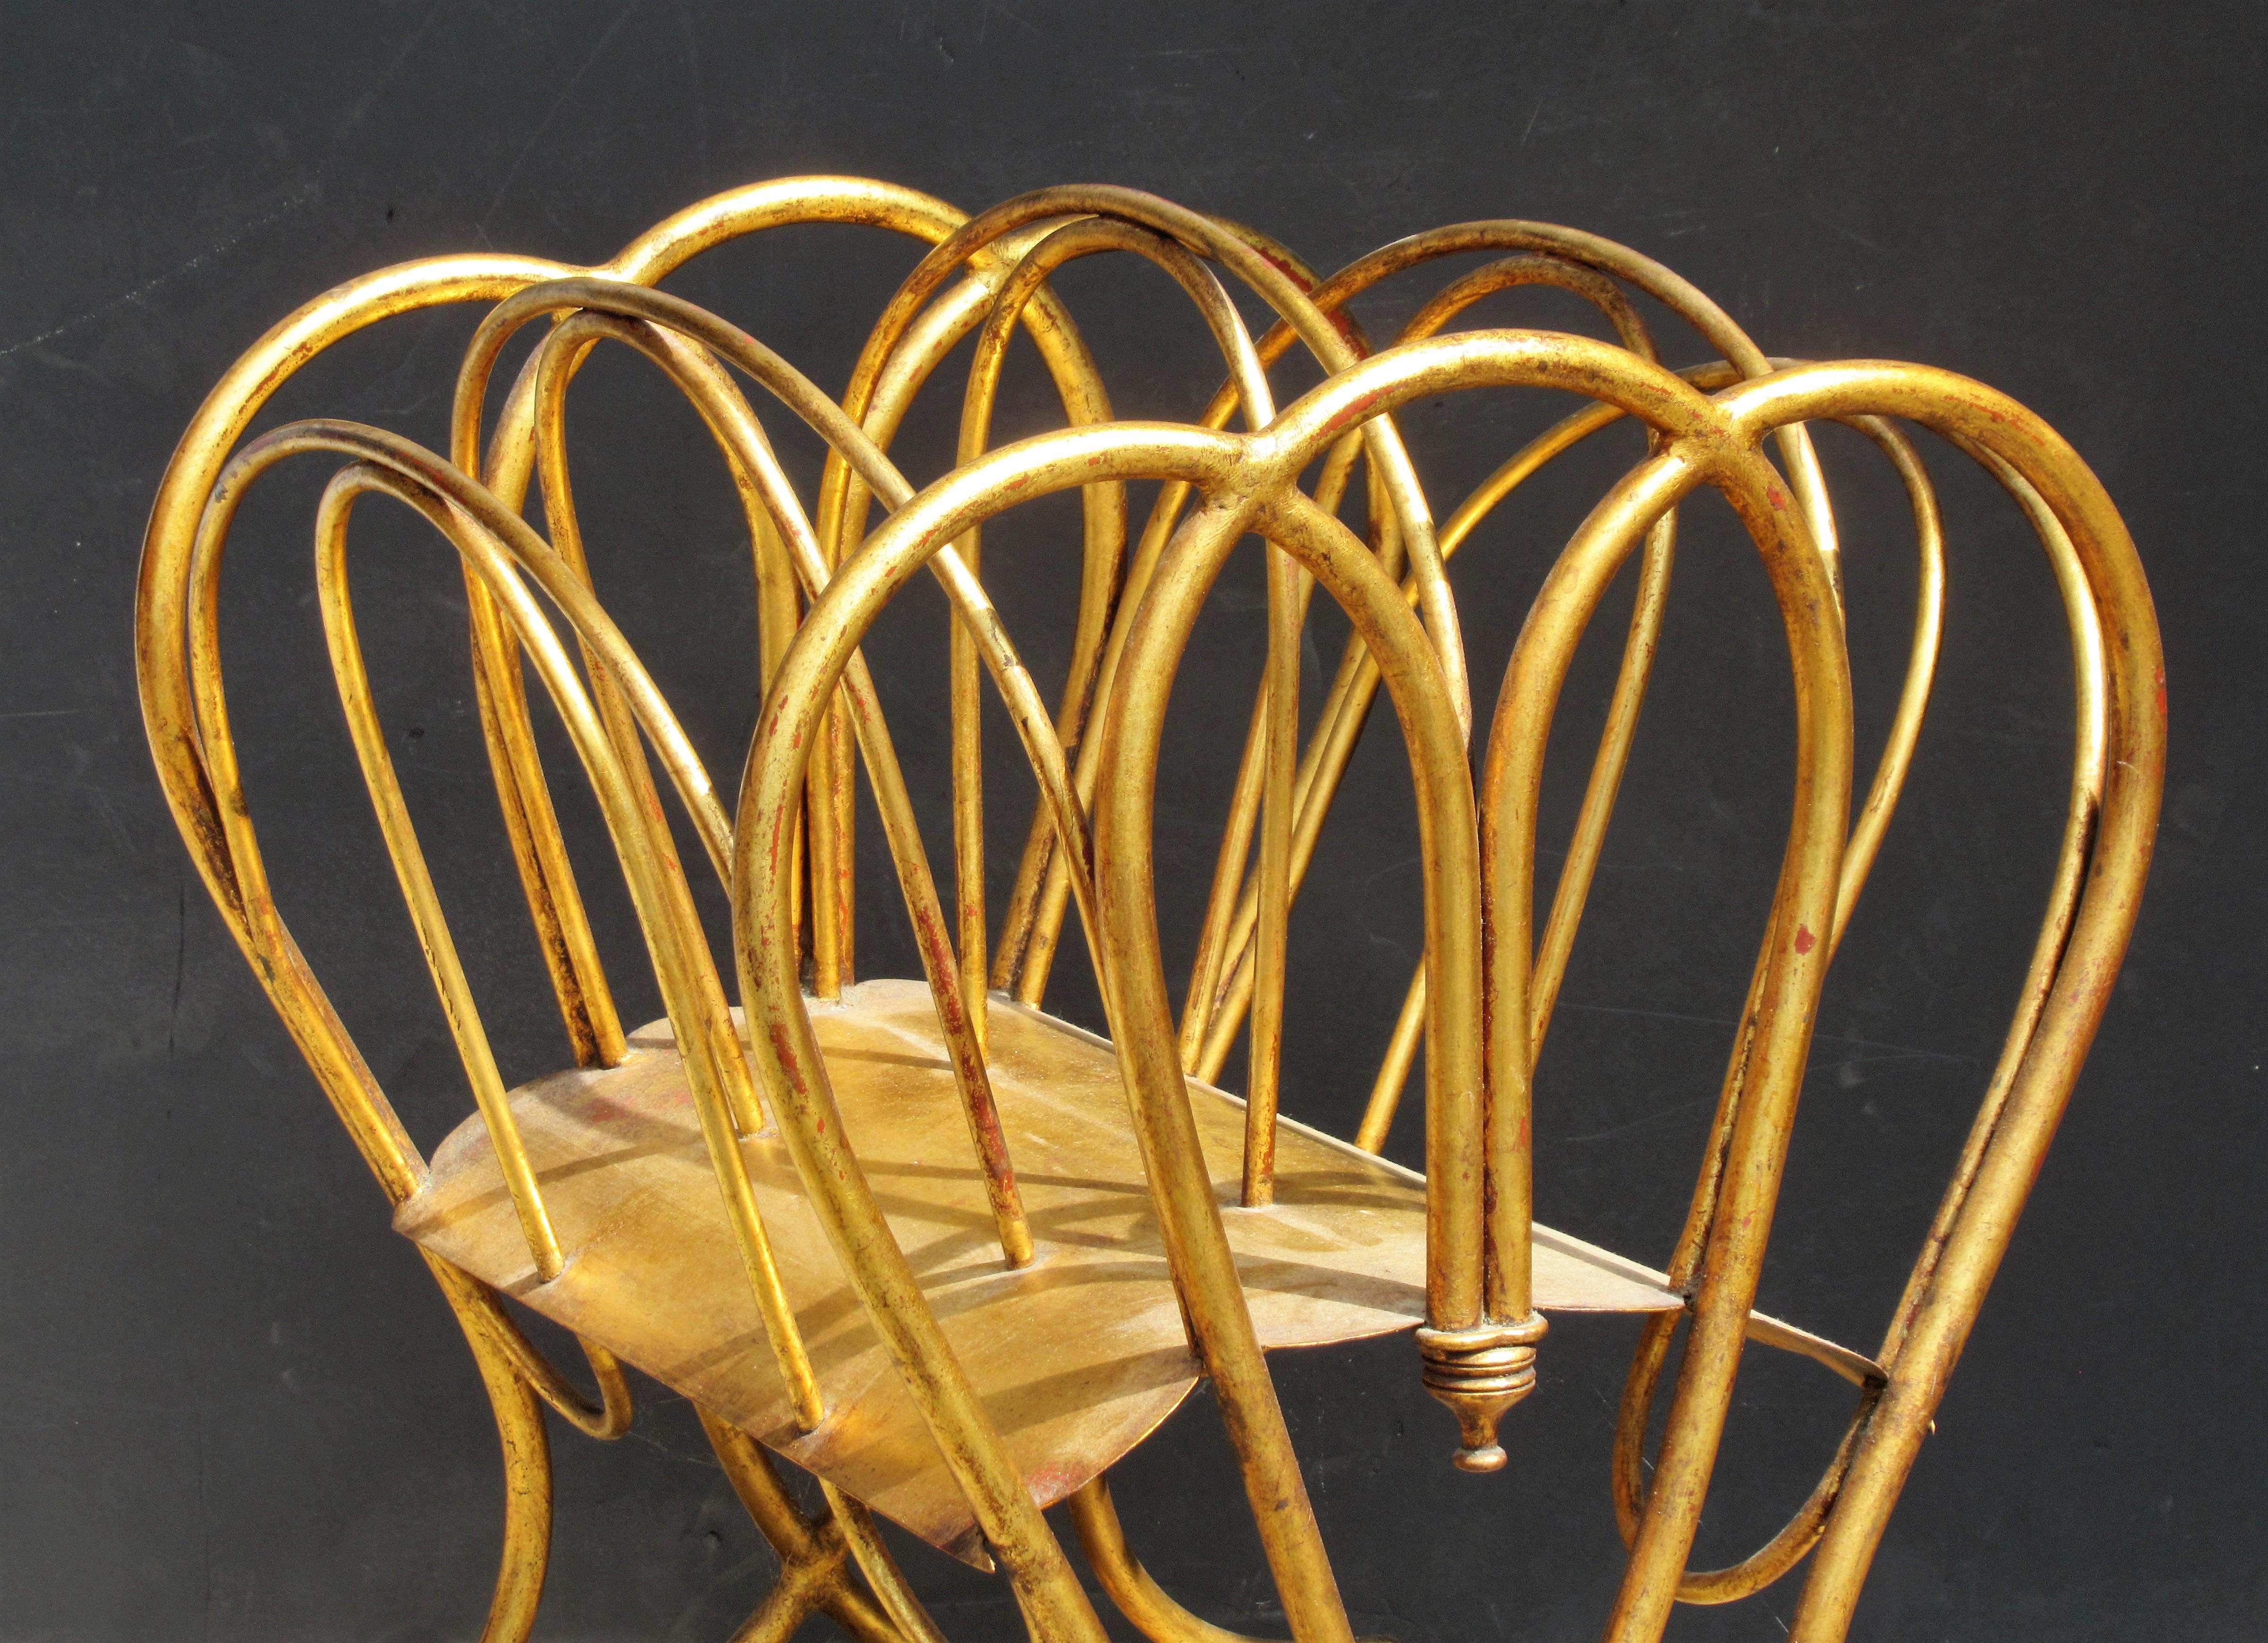 Italian gilt tole metal magazine rack stand with beautifully aged original gilded surface showing some areas of underlying red bole, circa 1960's. Great quality. This one is a beauty.  Look at all pictures and read condition report in comment